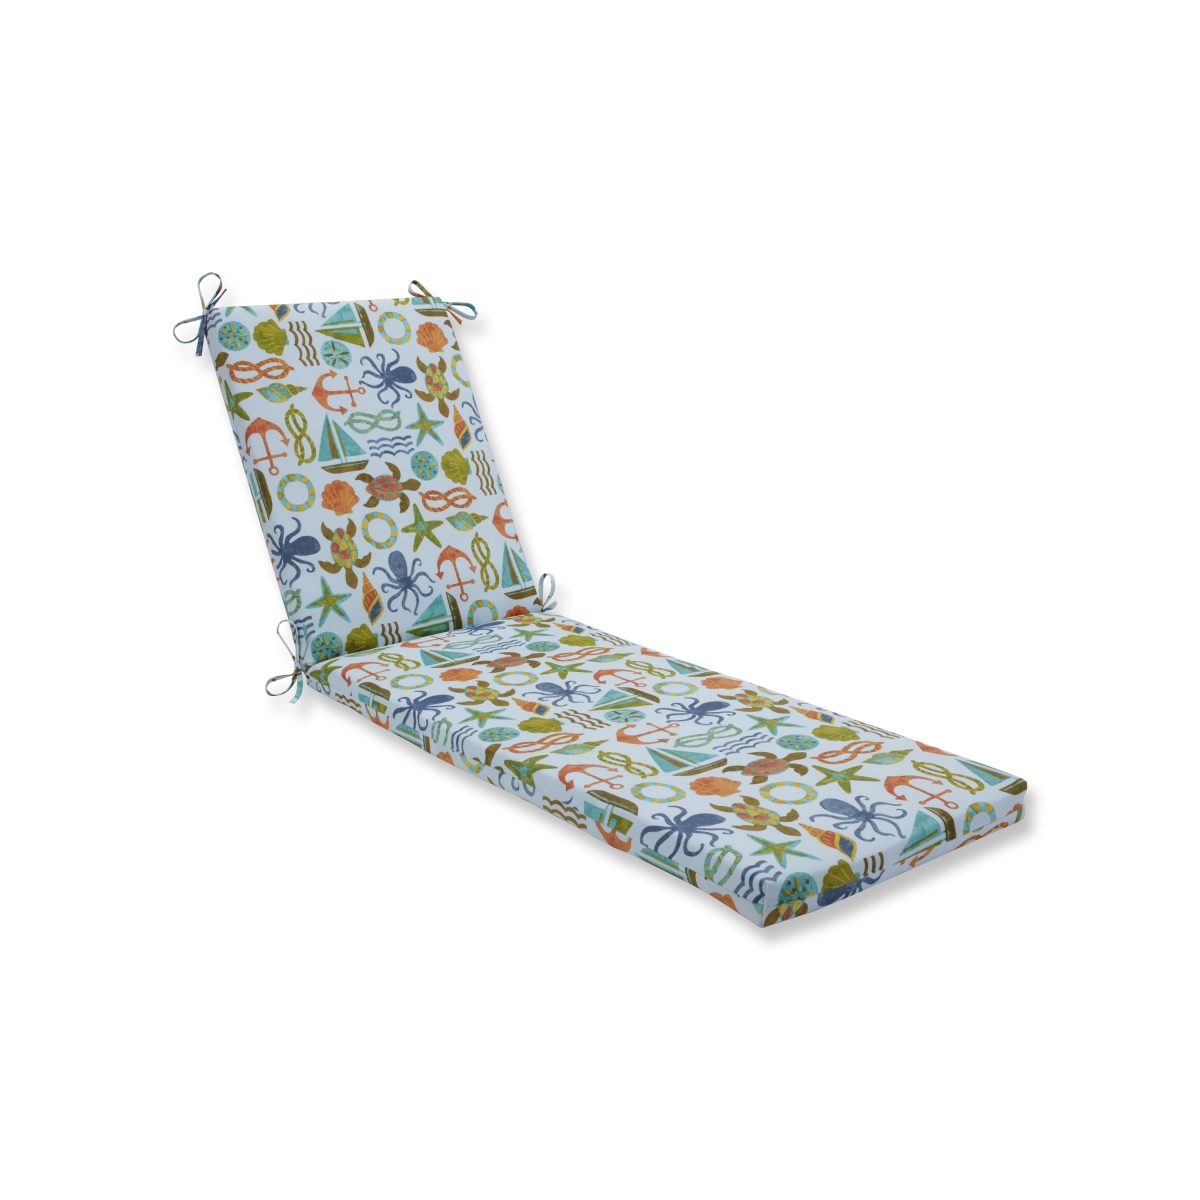 80 X 23 X 3 In. Outdoor & Indoor Seapoint Summer Chaise Lounge Cushion, Blue